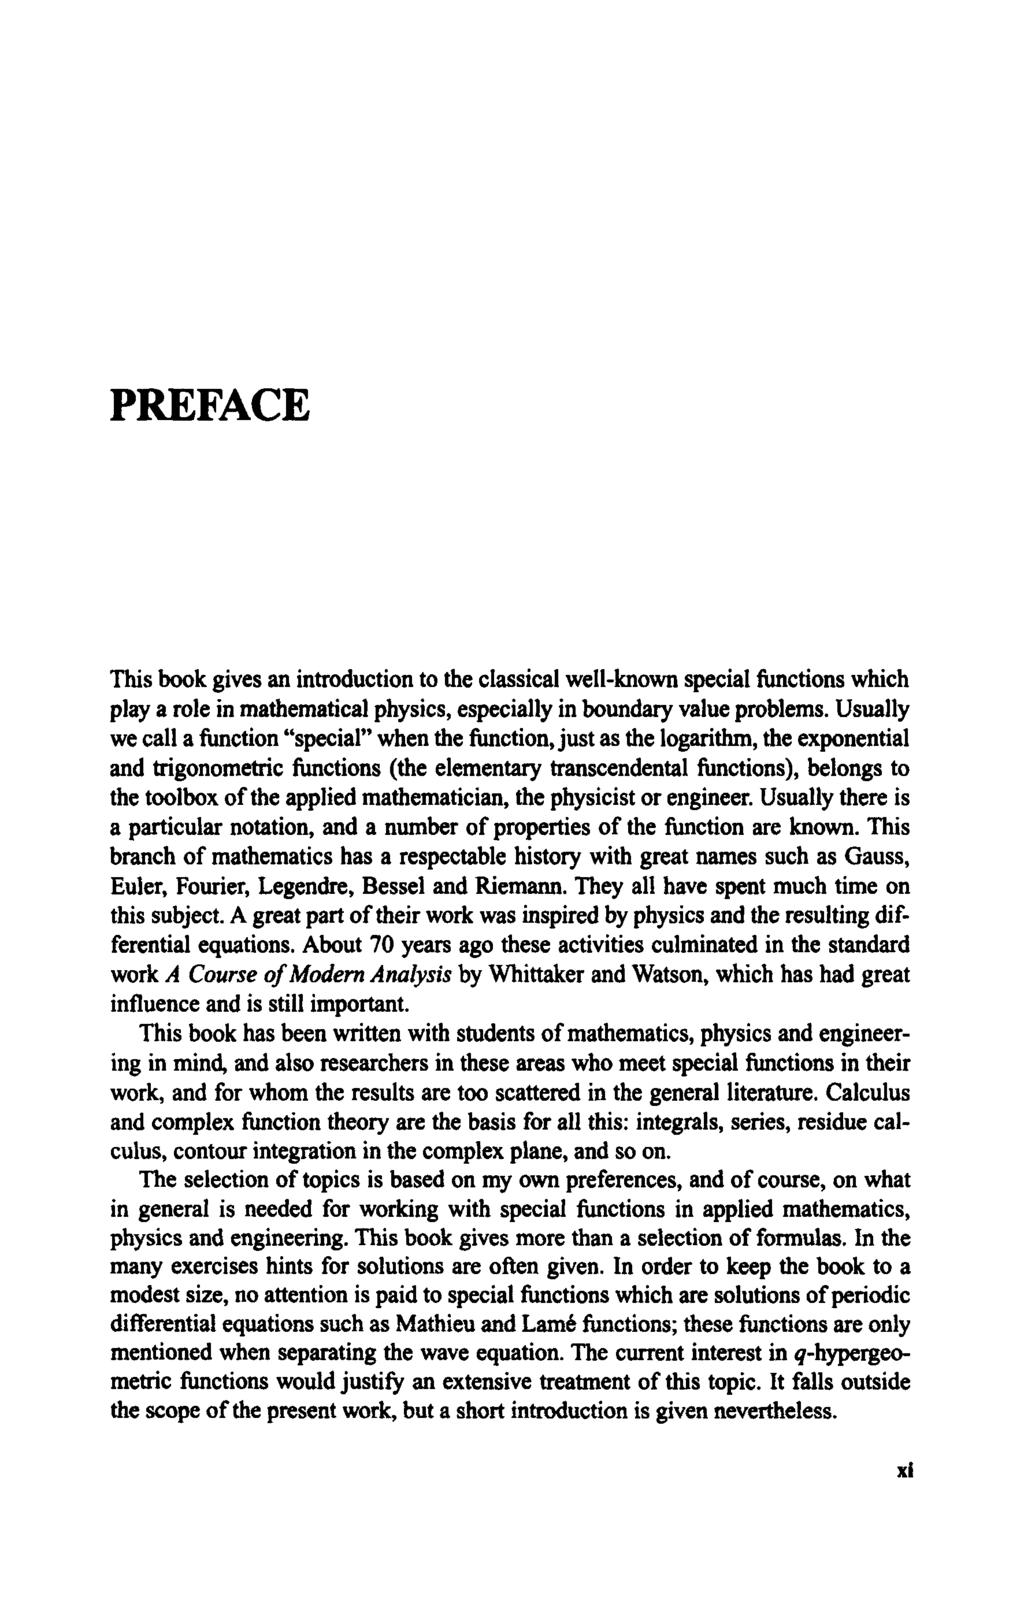 PREFACE This book gives an introduction to the classical well-known special functions which play a role in mathematical physics, especially in boundary value problems.